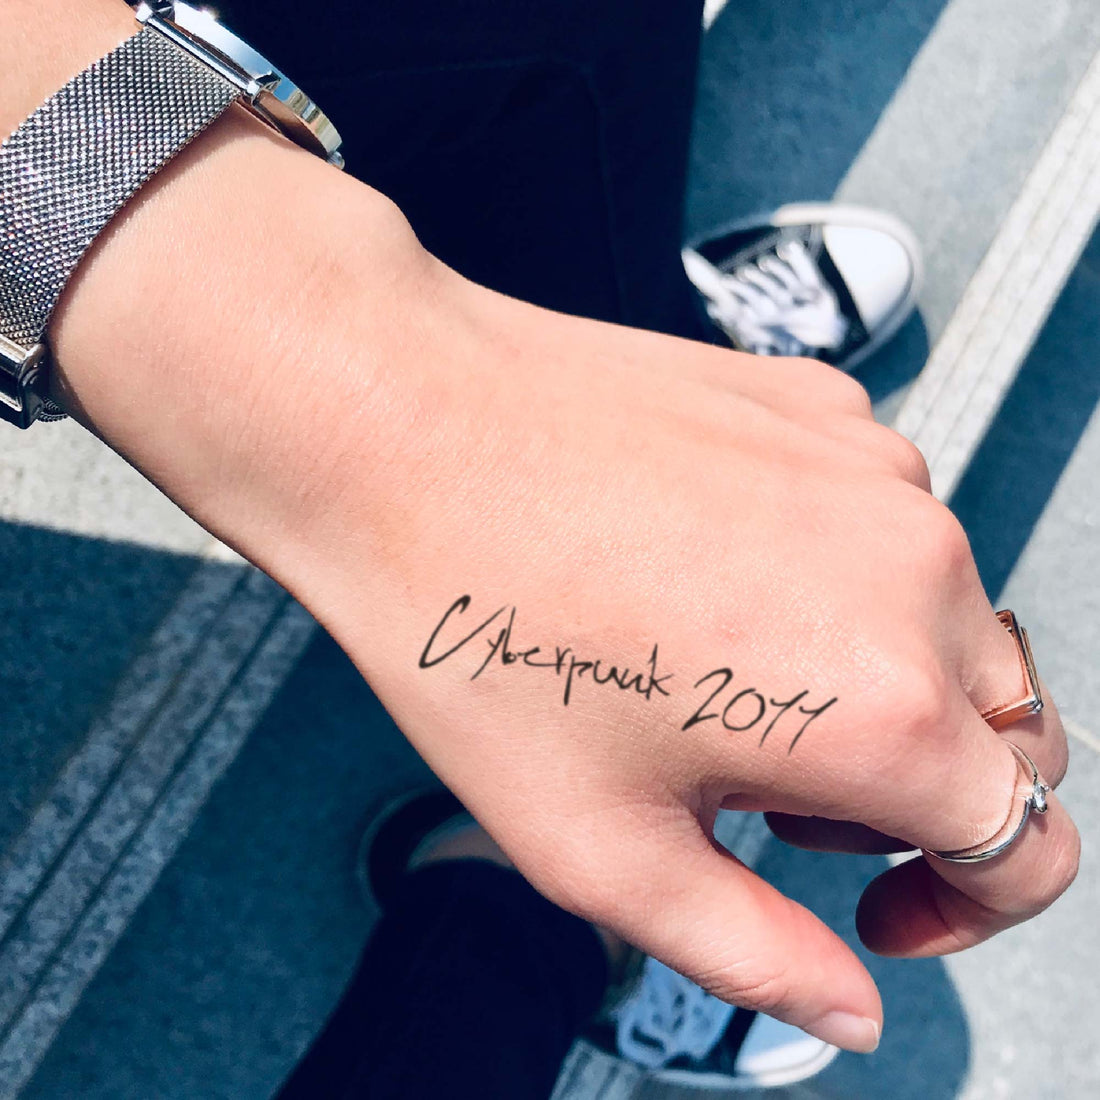 Cyberpunk 2077 custom temporary tattoo sticker design idea inspiration meanings removal arm wrist hand words font name signature calligraphy lyrics tour concert outfits merch accessory gift souvenir costumes wear dress up code